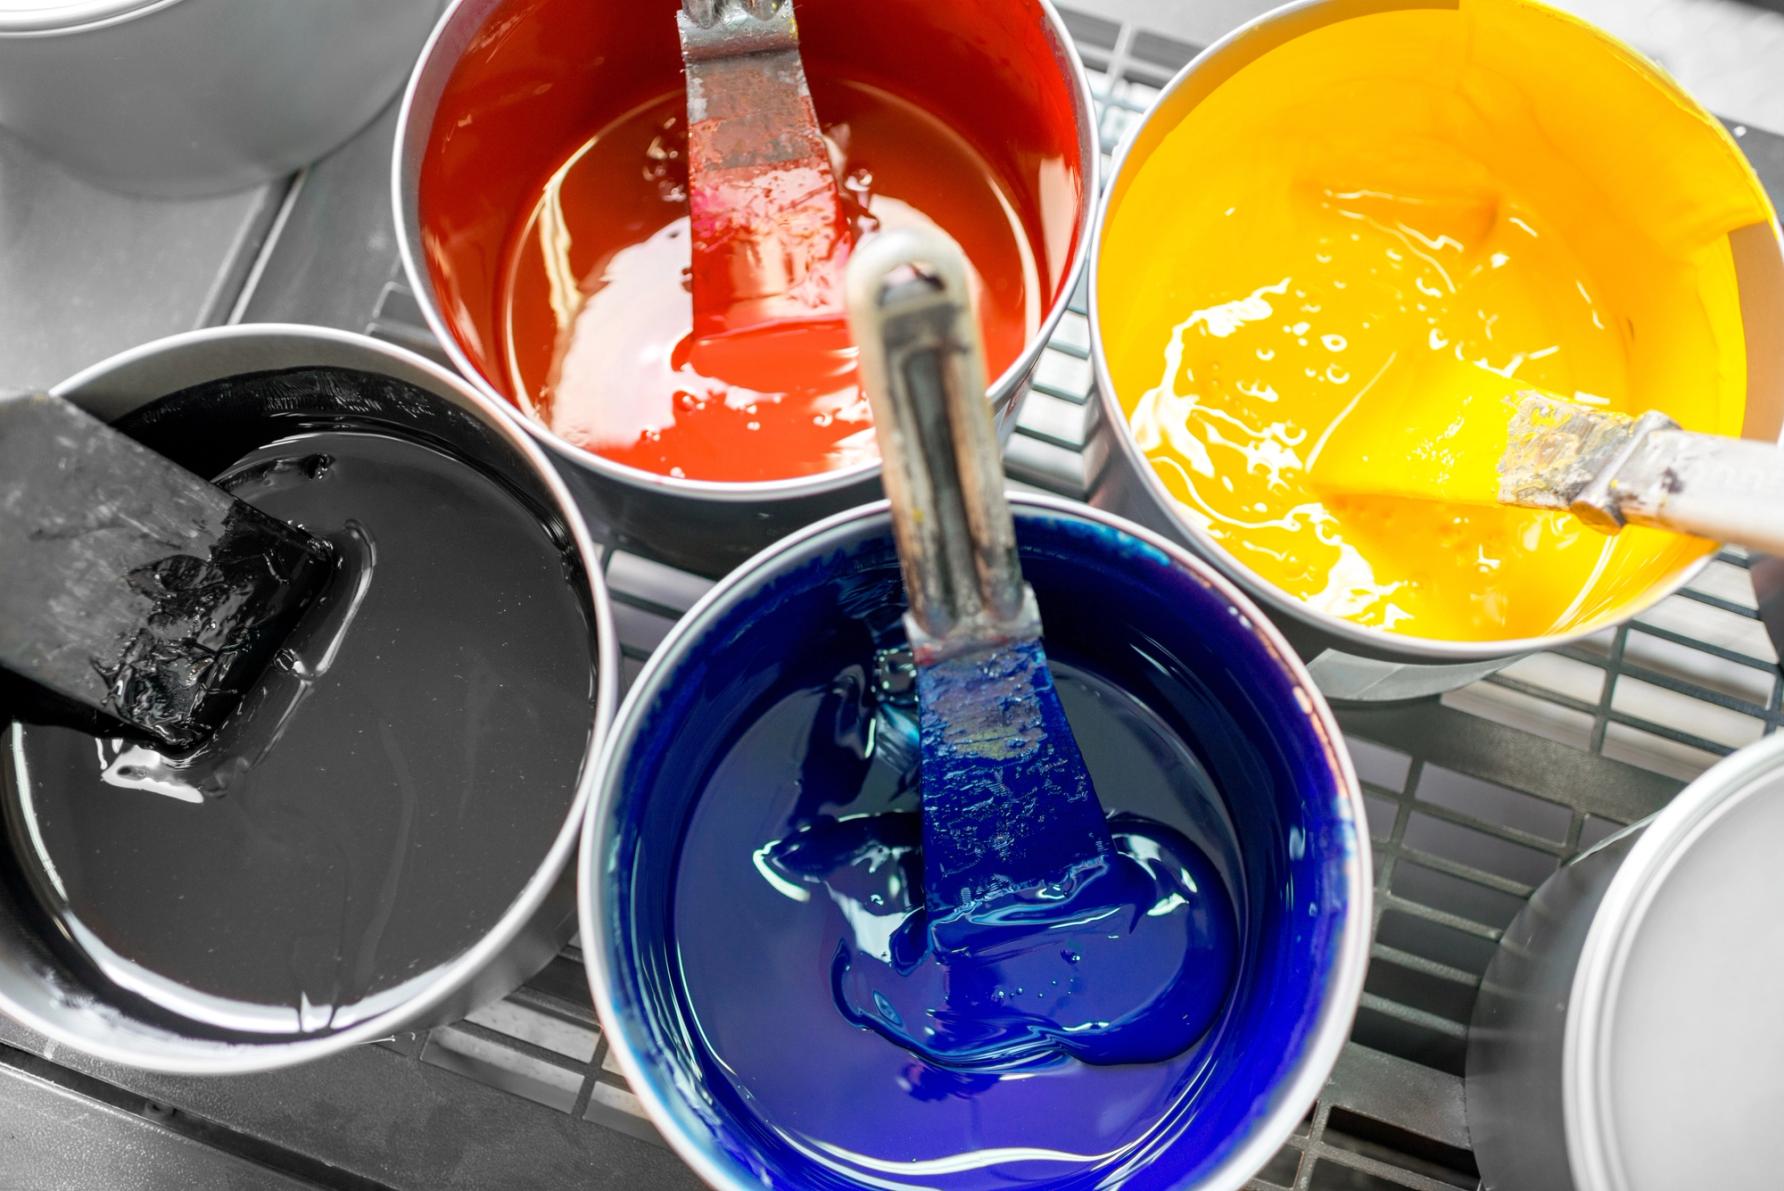 Buckets with CMYK paints